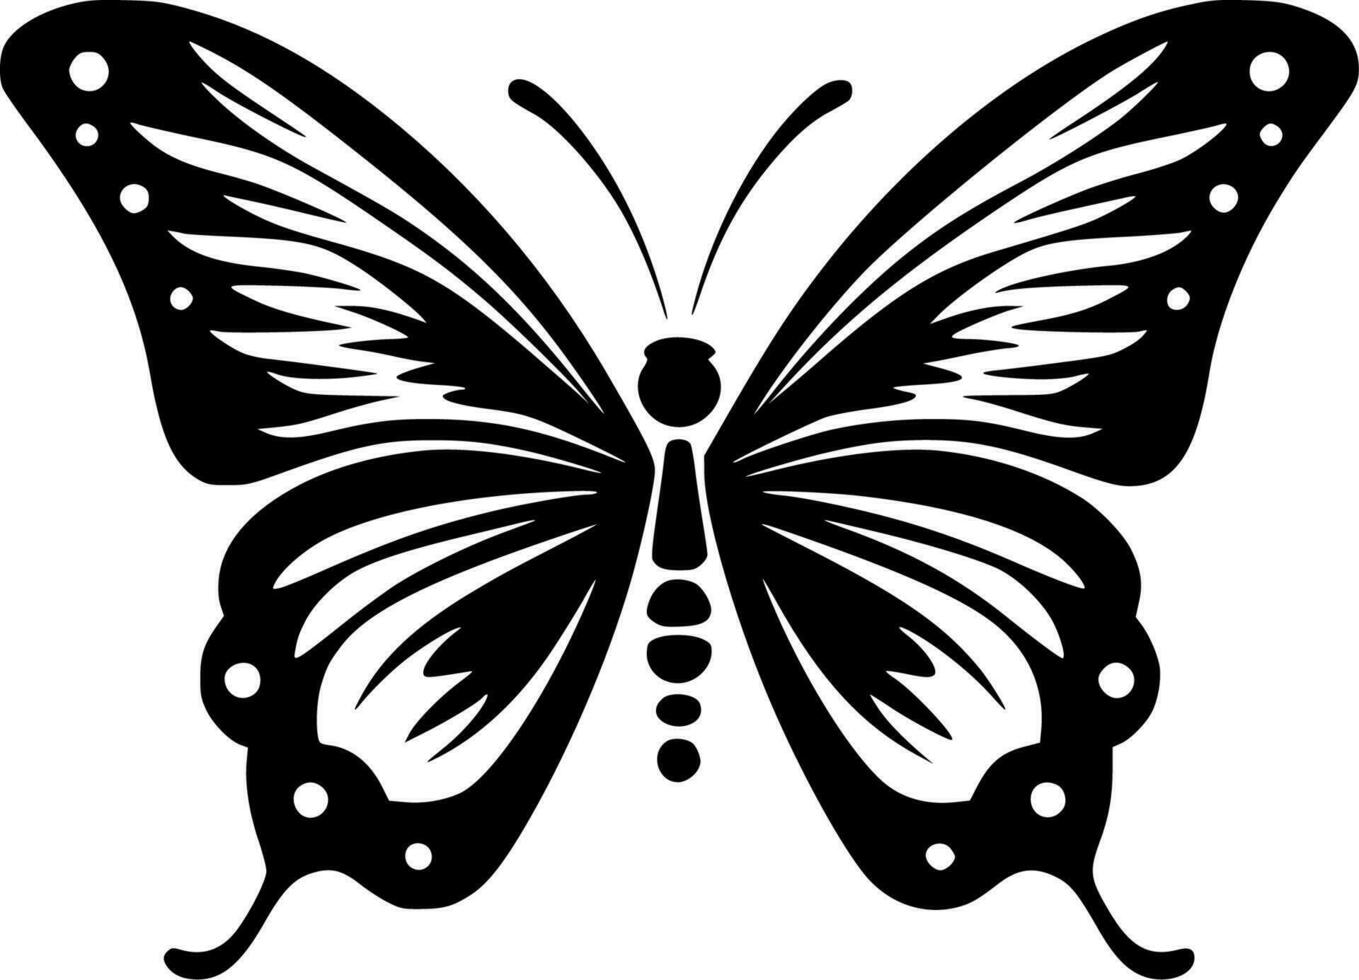 Butterfly, Minimalist and Simple Silhouette - Vector illustration